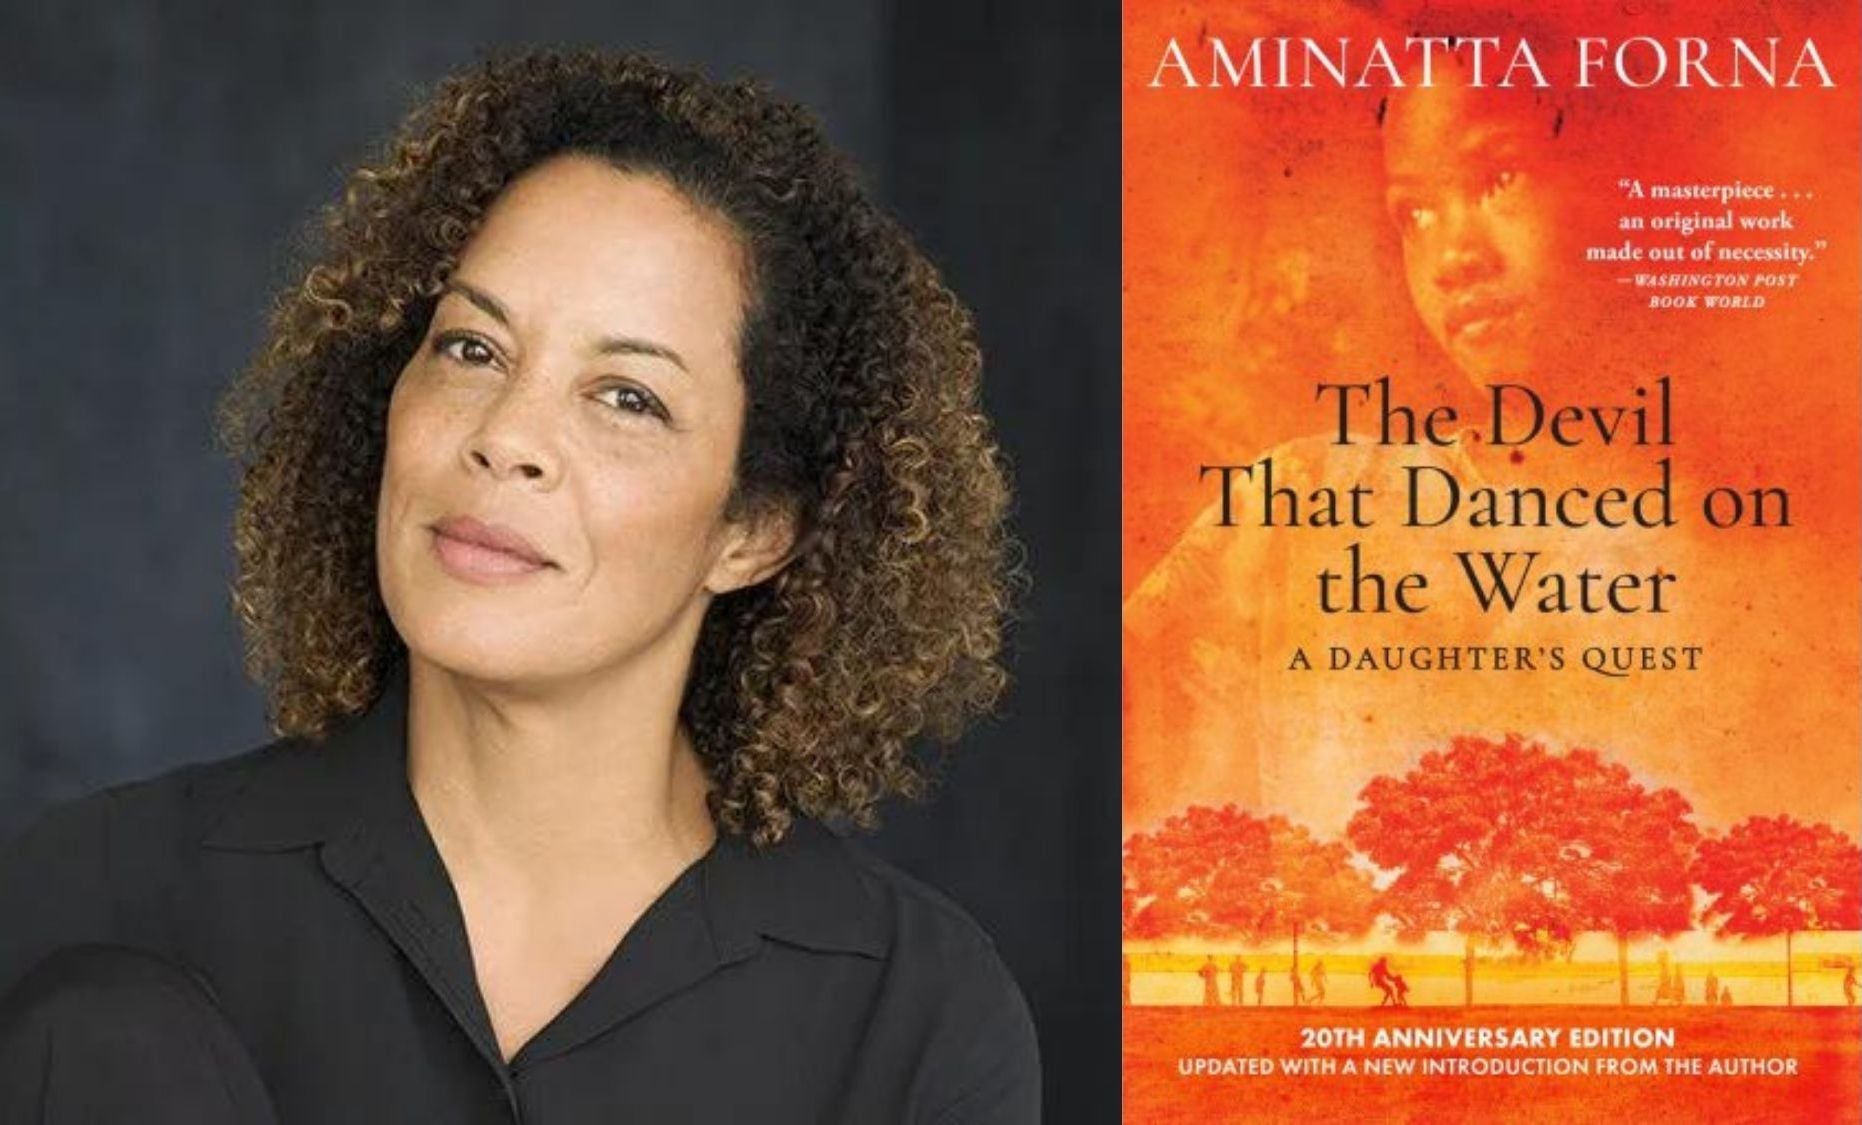 Aminatta Forna headshot and cover for The Devil That Danced on Water: A Daughter's Quest.